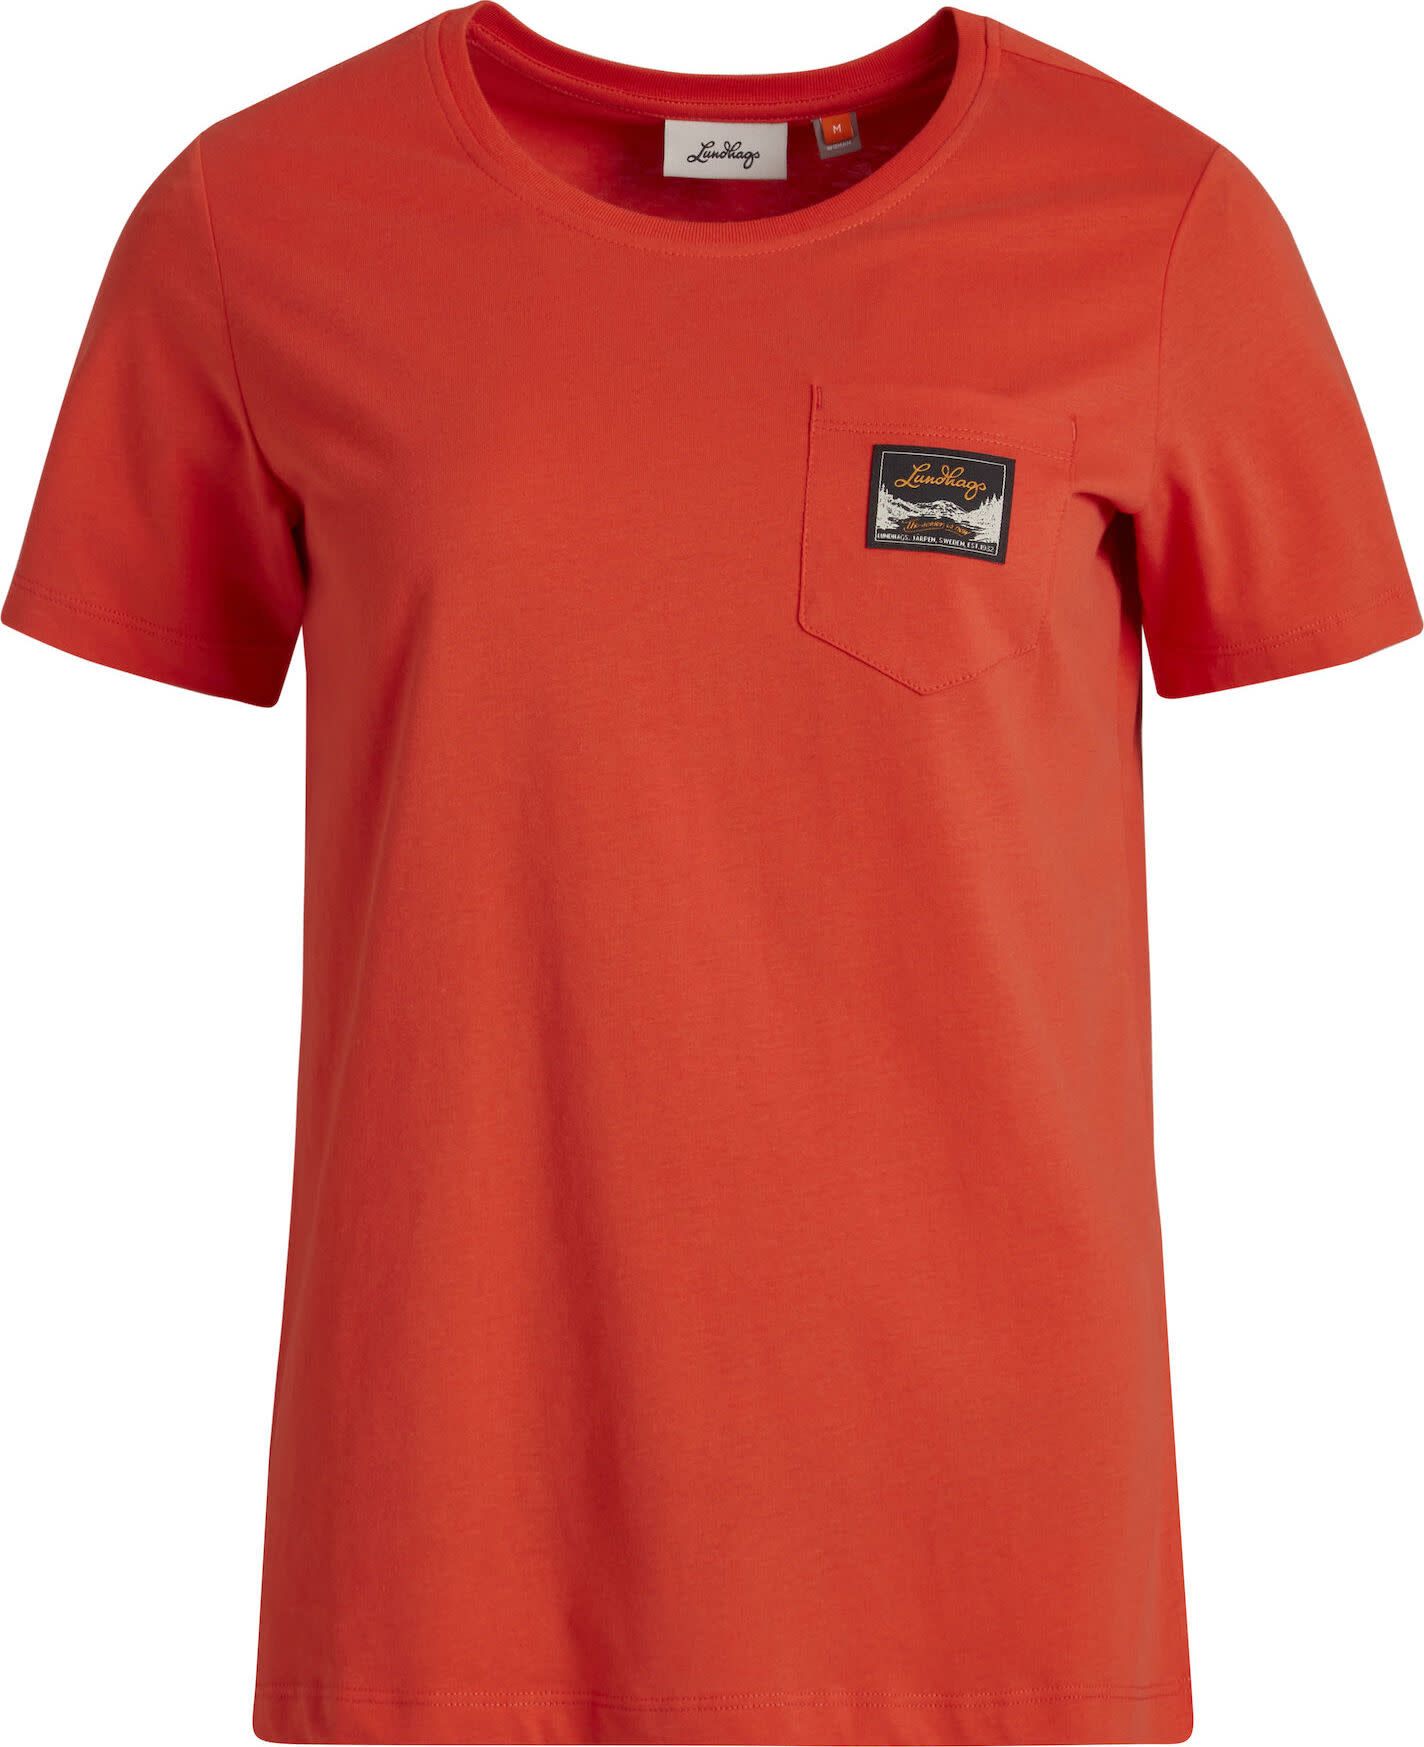 Lundhags Women's Knak Tee Lively Red